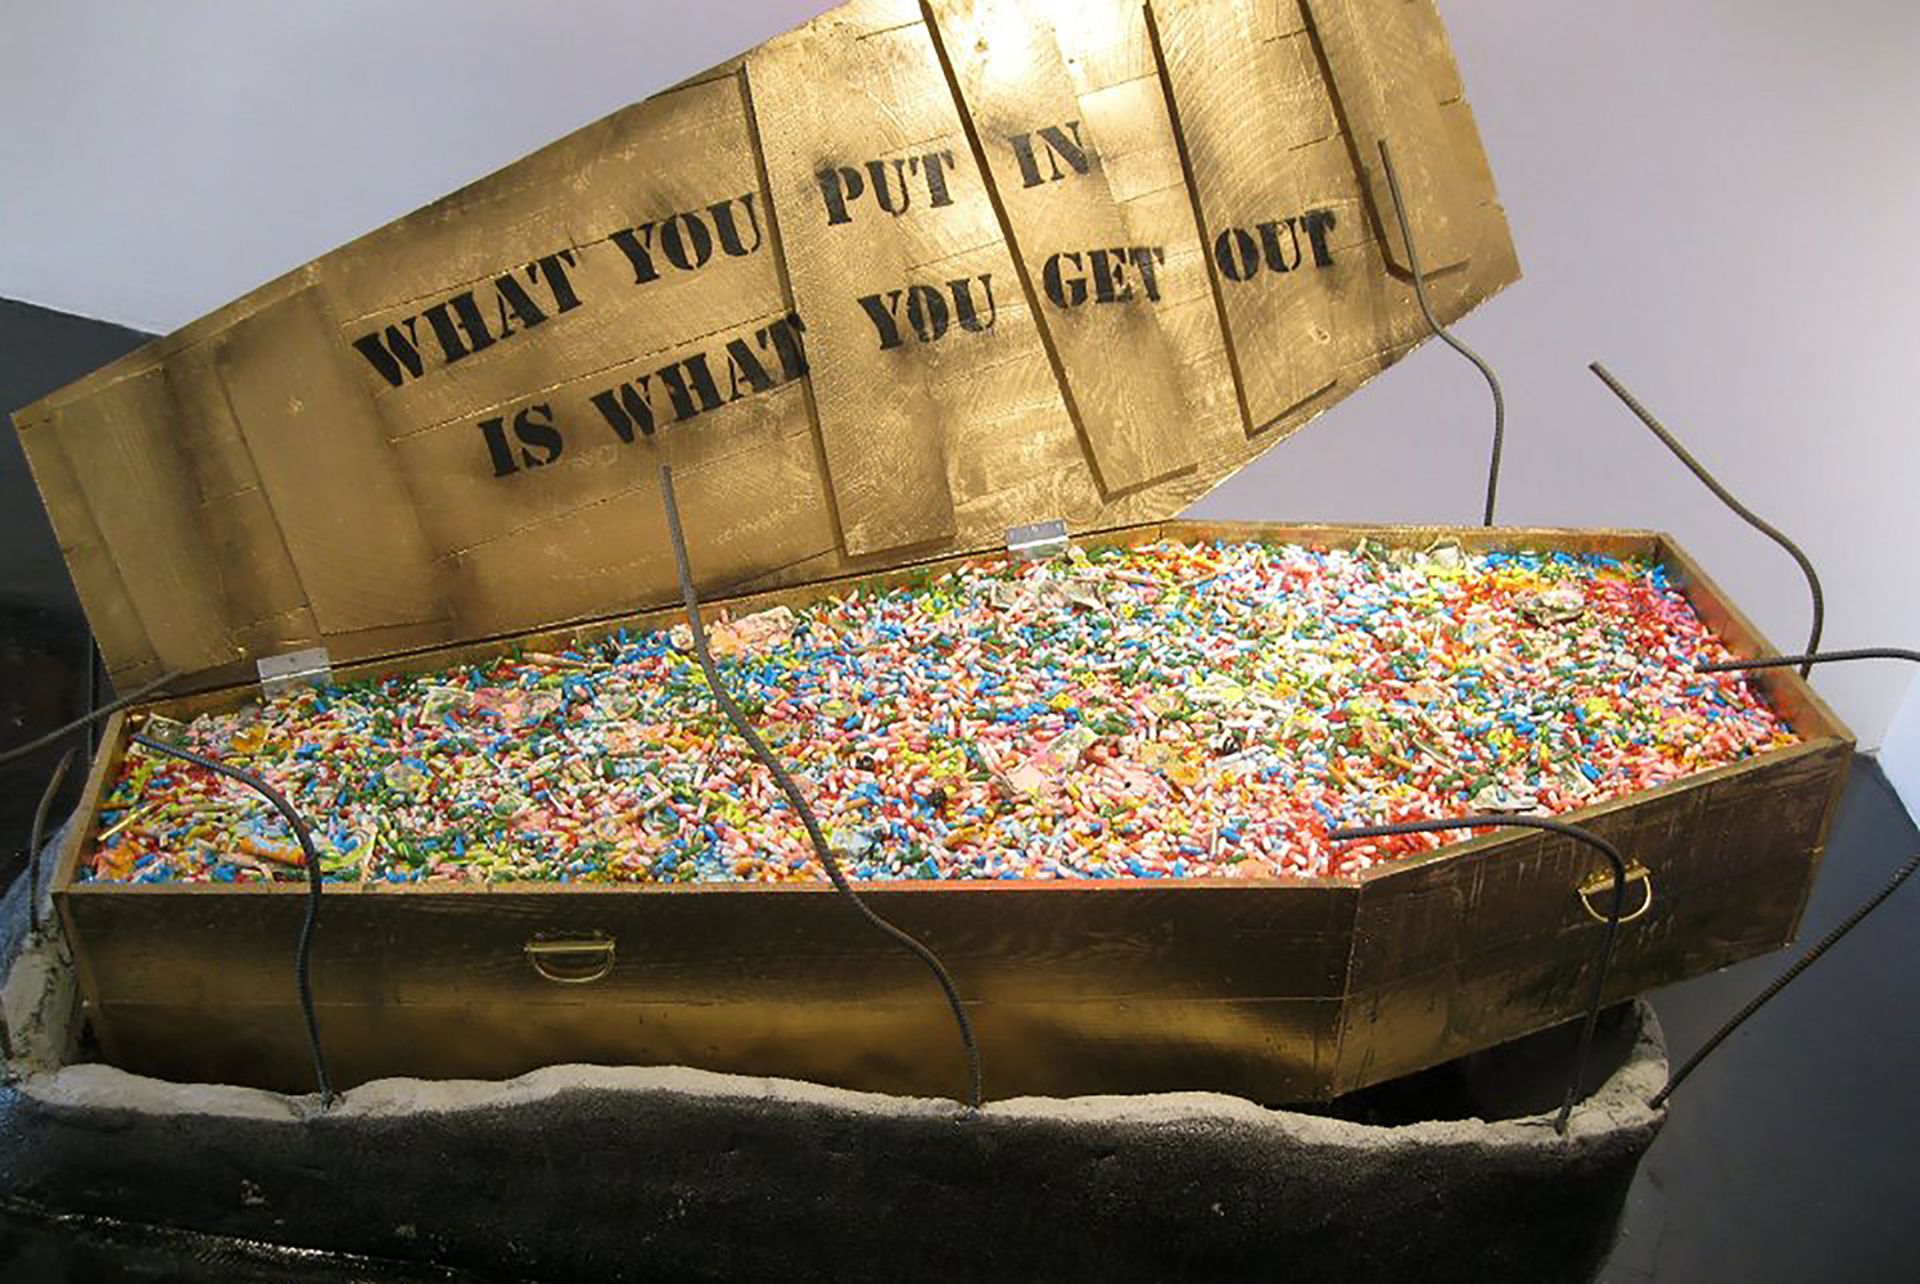 Maximilian Wiedemann "You get out what you put in" full-size Coffin Sculpture